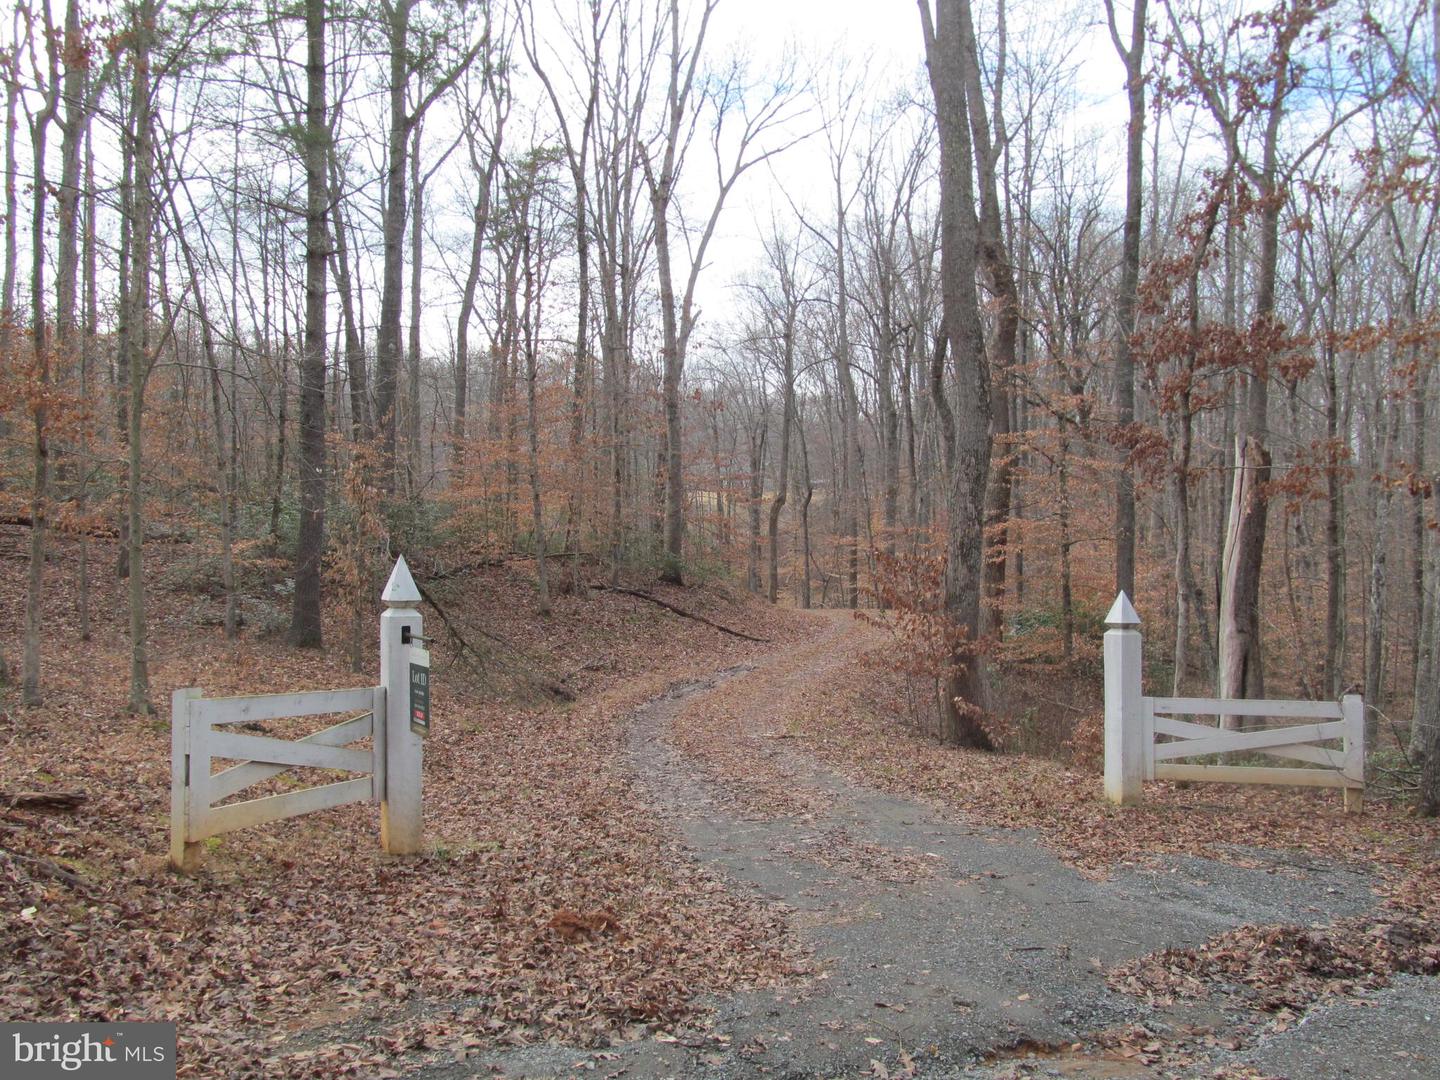 LOT 1D WILHOITS MILL RD WILHOITS MILL ROAD, BARBOURSVILLE, Virginia 22923, ,Land,For sale,LOT 1D WILHOITS MILL RD WILHOITS MILL ROAD,VAGR2000448 MLS # VAGR2000448